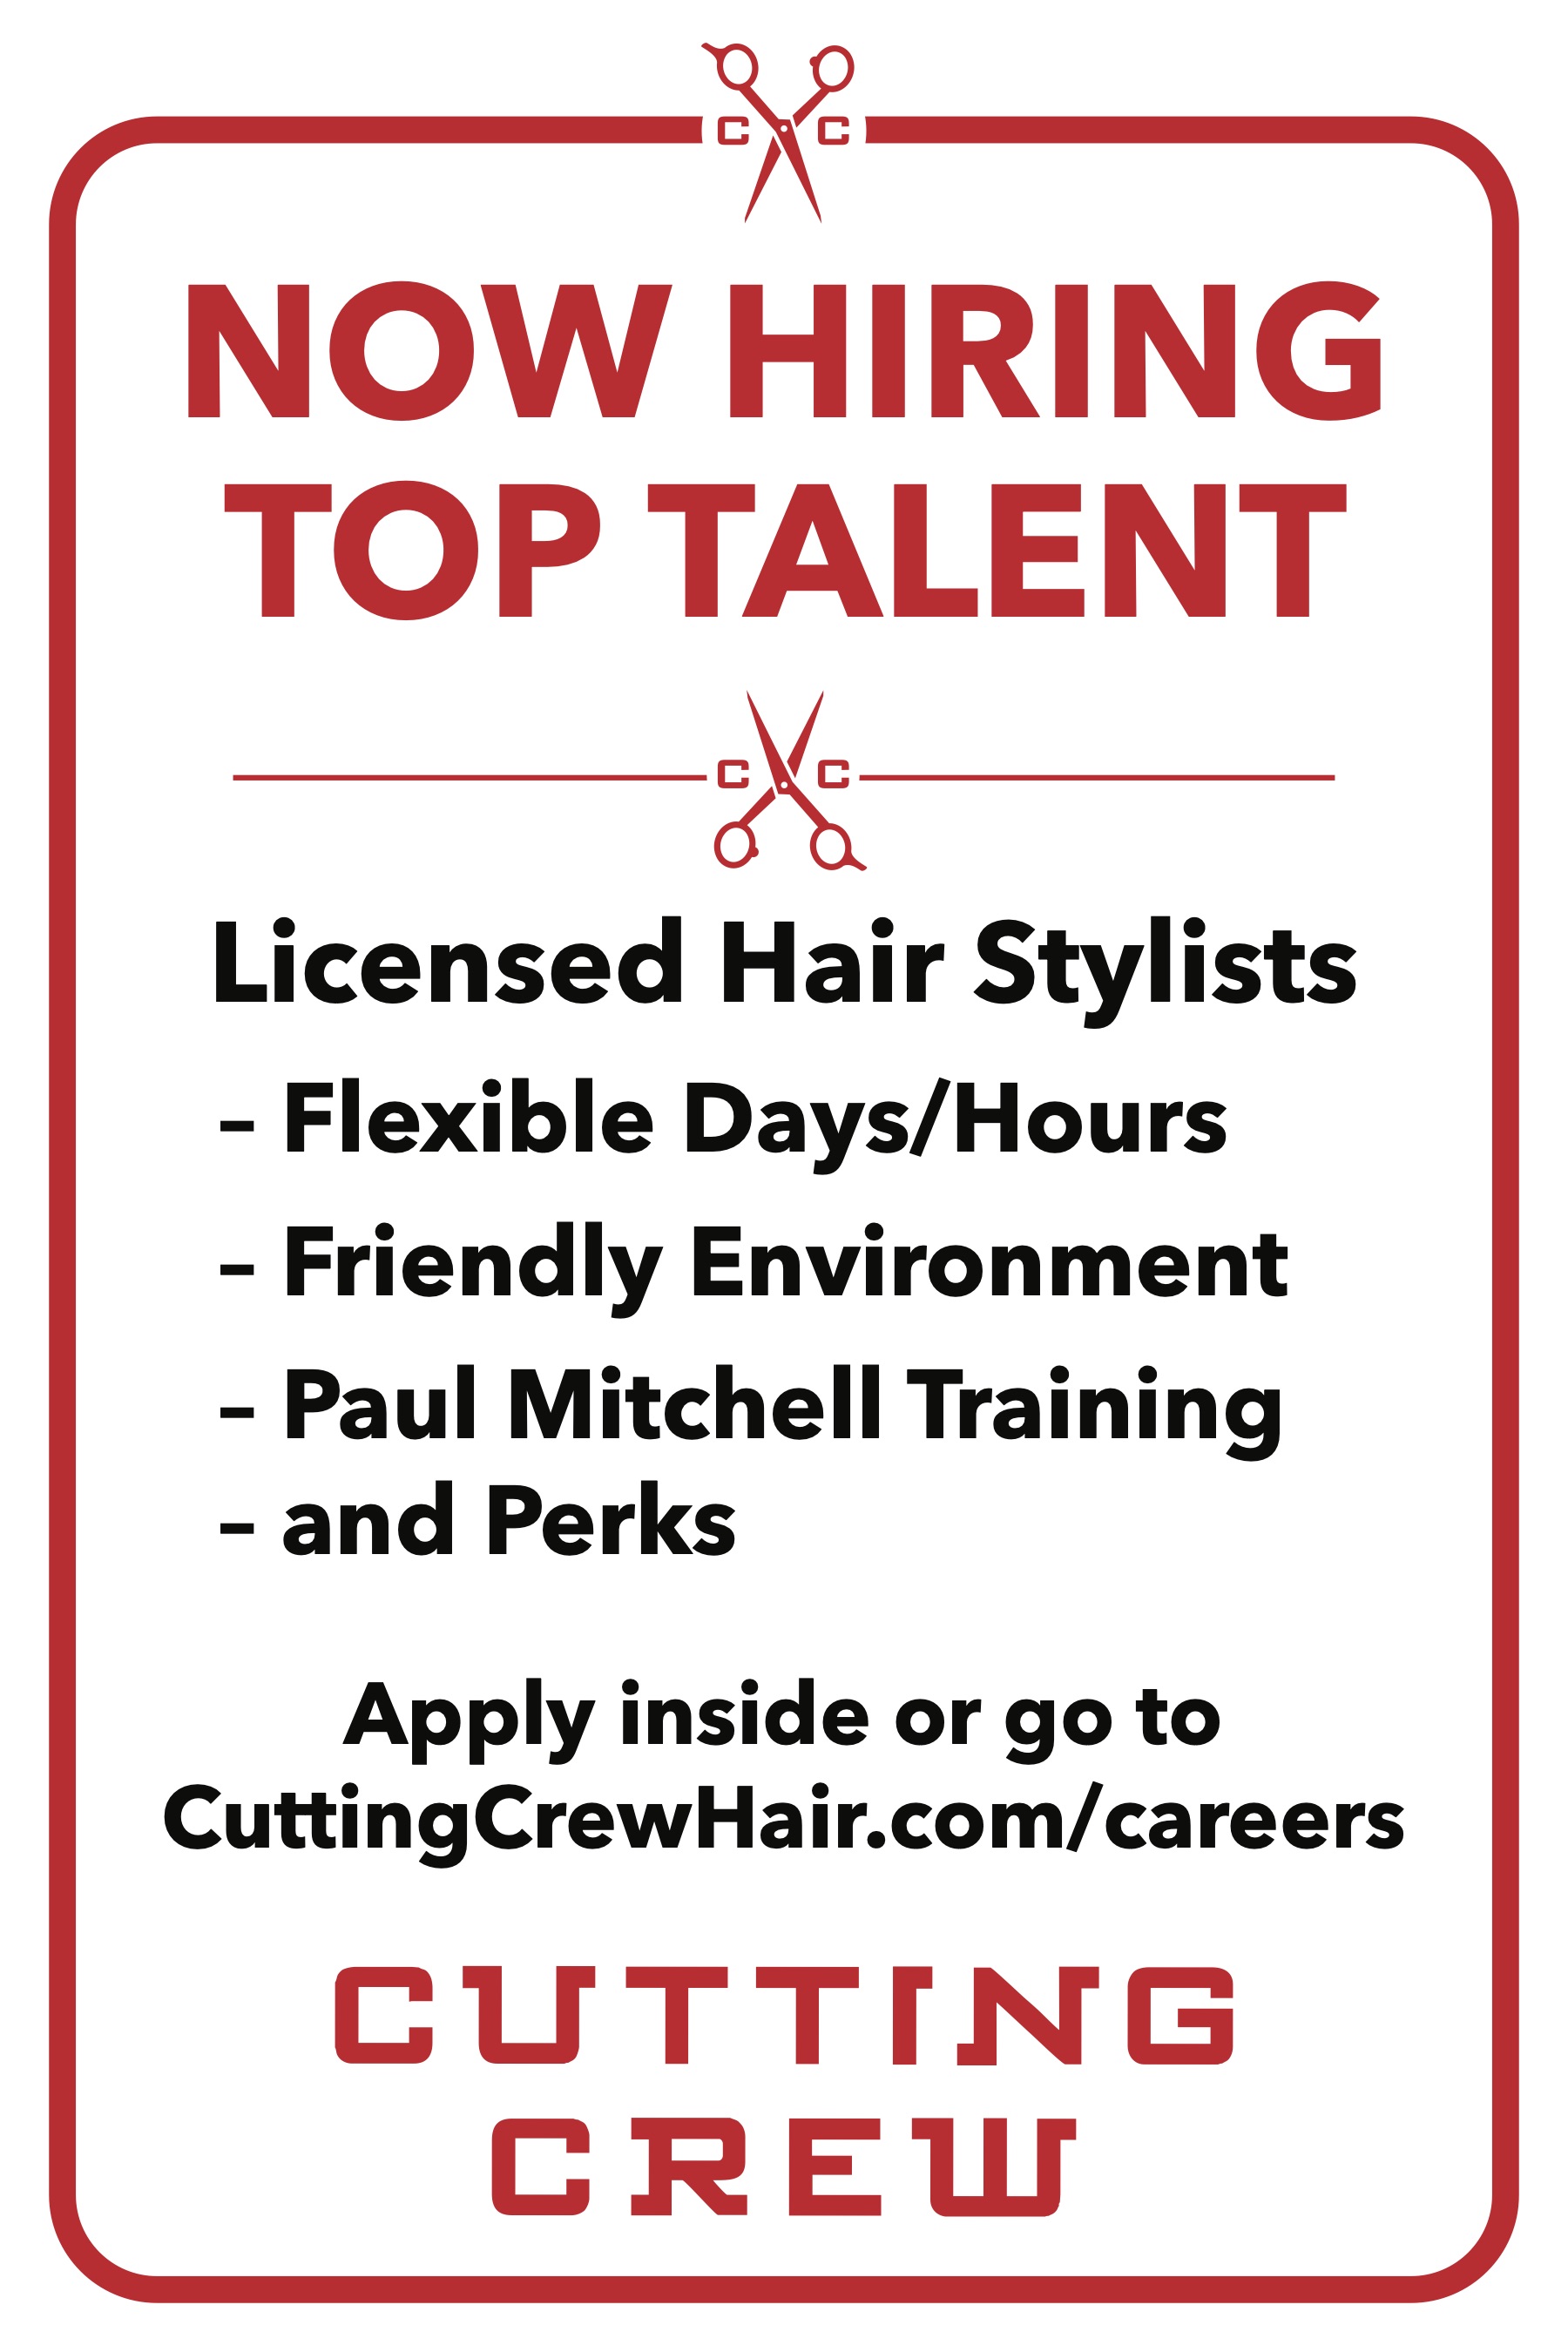 Jump start your career today with the Cutting Crew Hair Salon team and our current employment opportunities in Oswego.